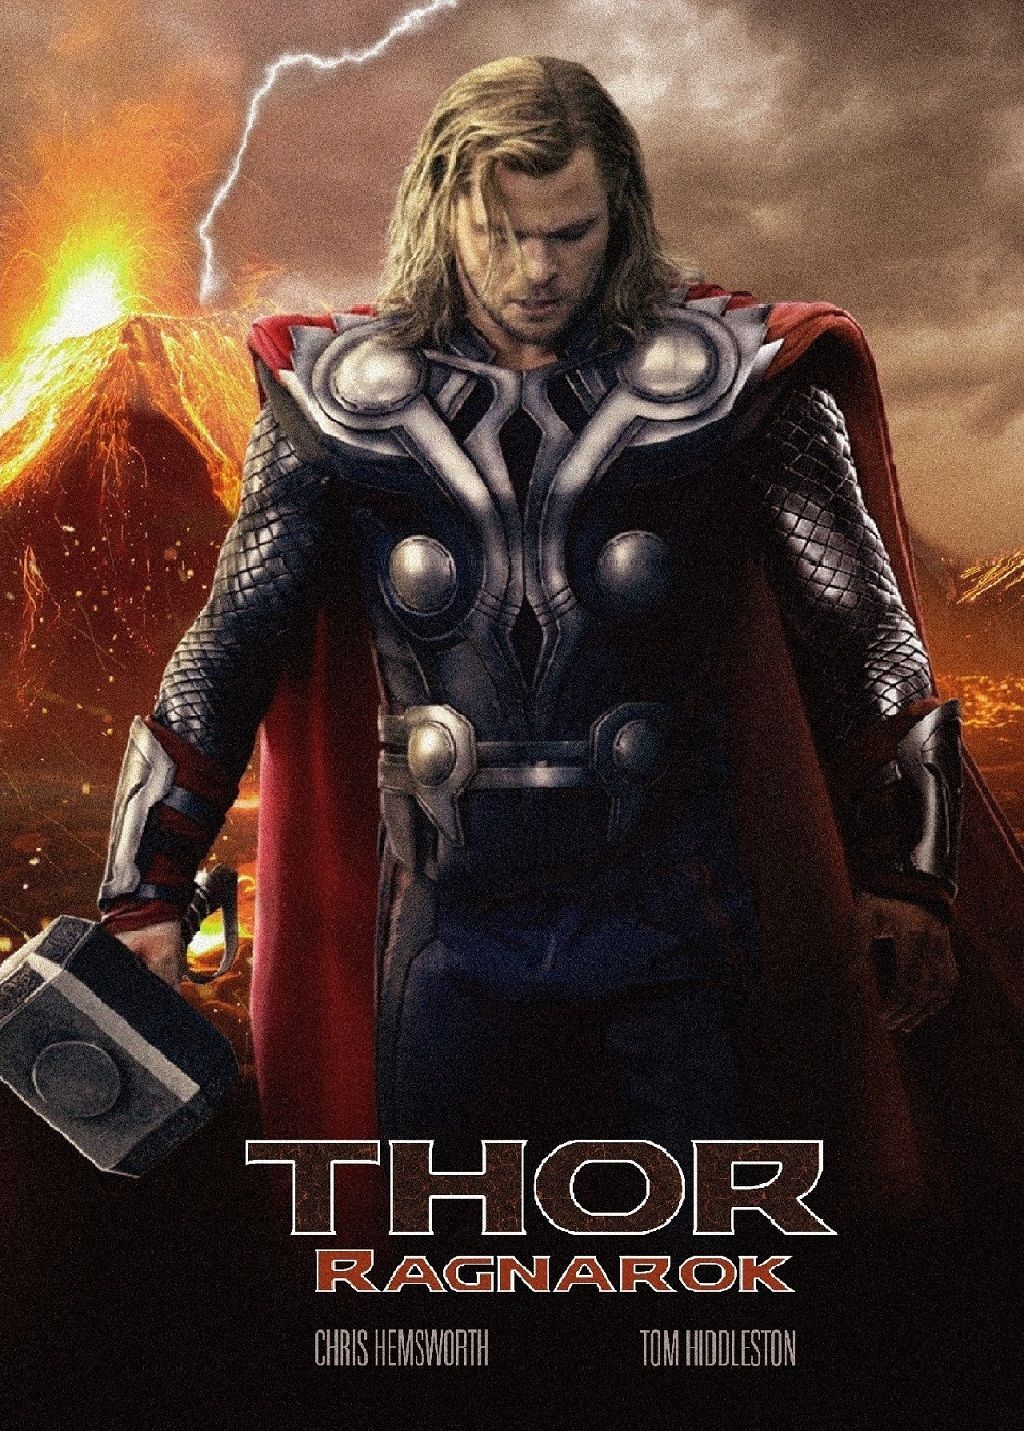 thor full movie download